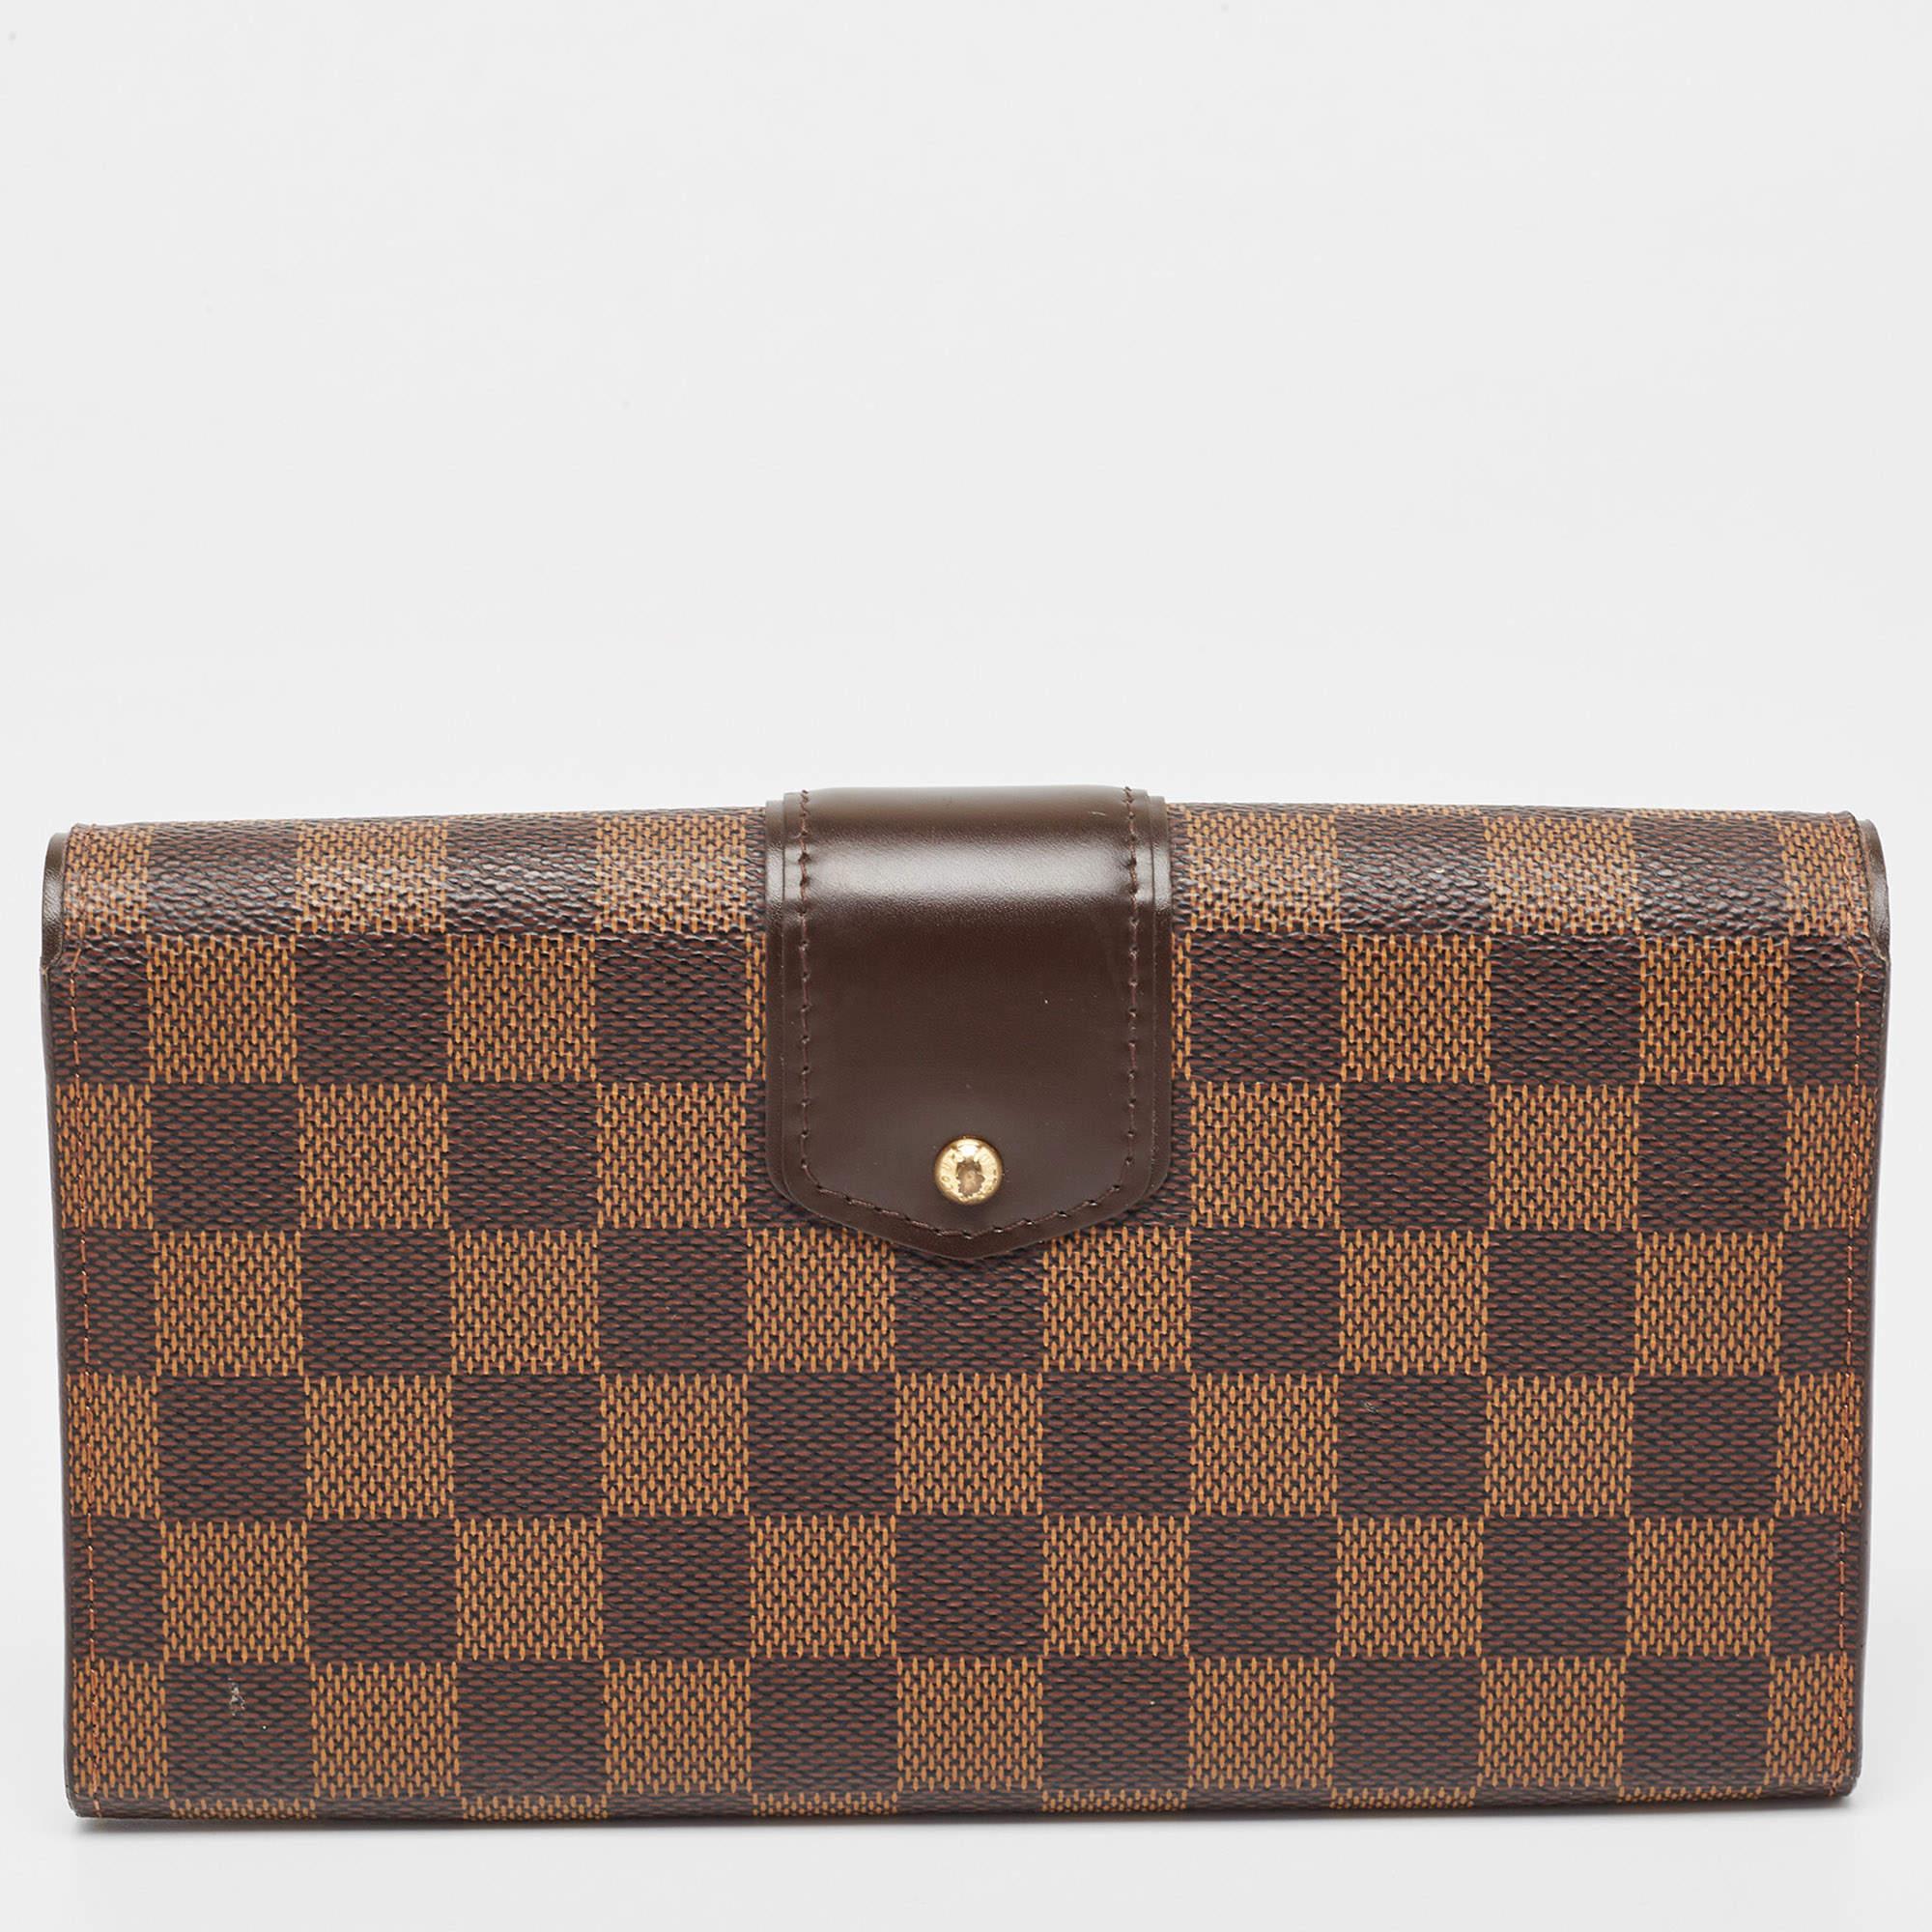 Carry this exquisite wallet by Louis Vuitton in any one of your handbags. Crafted from Damier canvas, it features a polished gold push lock. The interior features compartmentalized to secure your monetary essentials.

